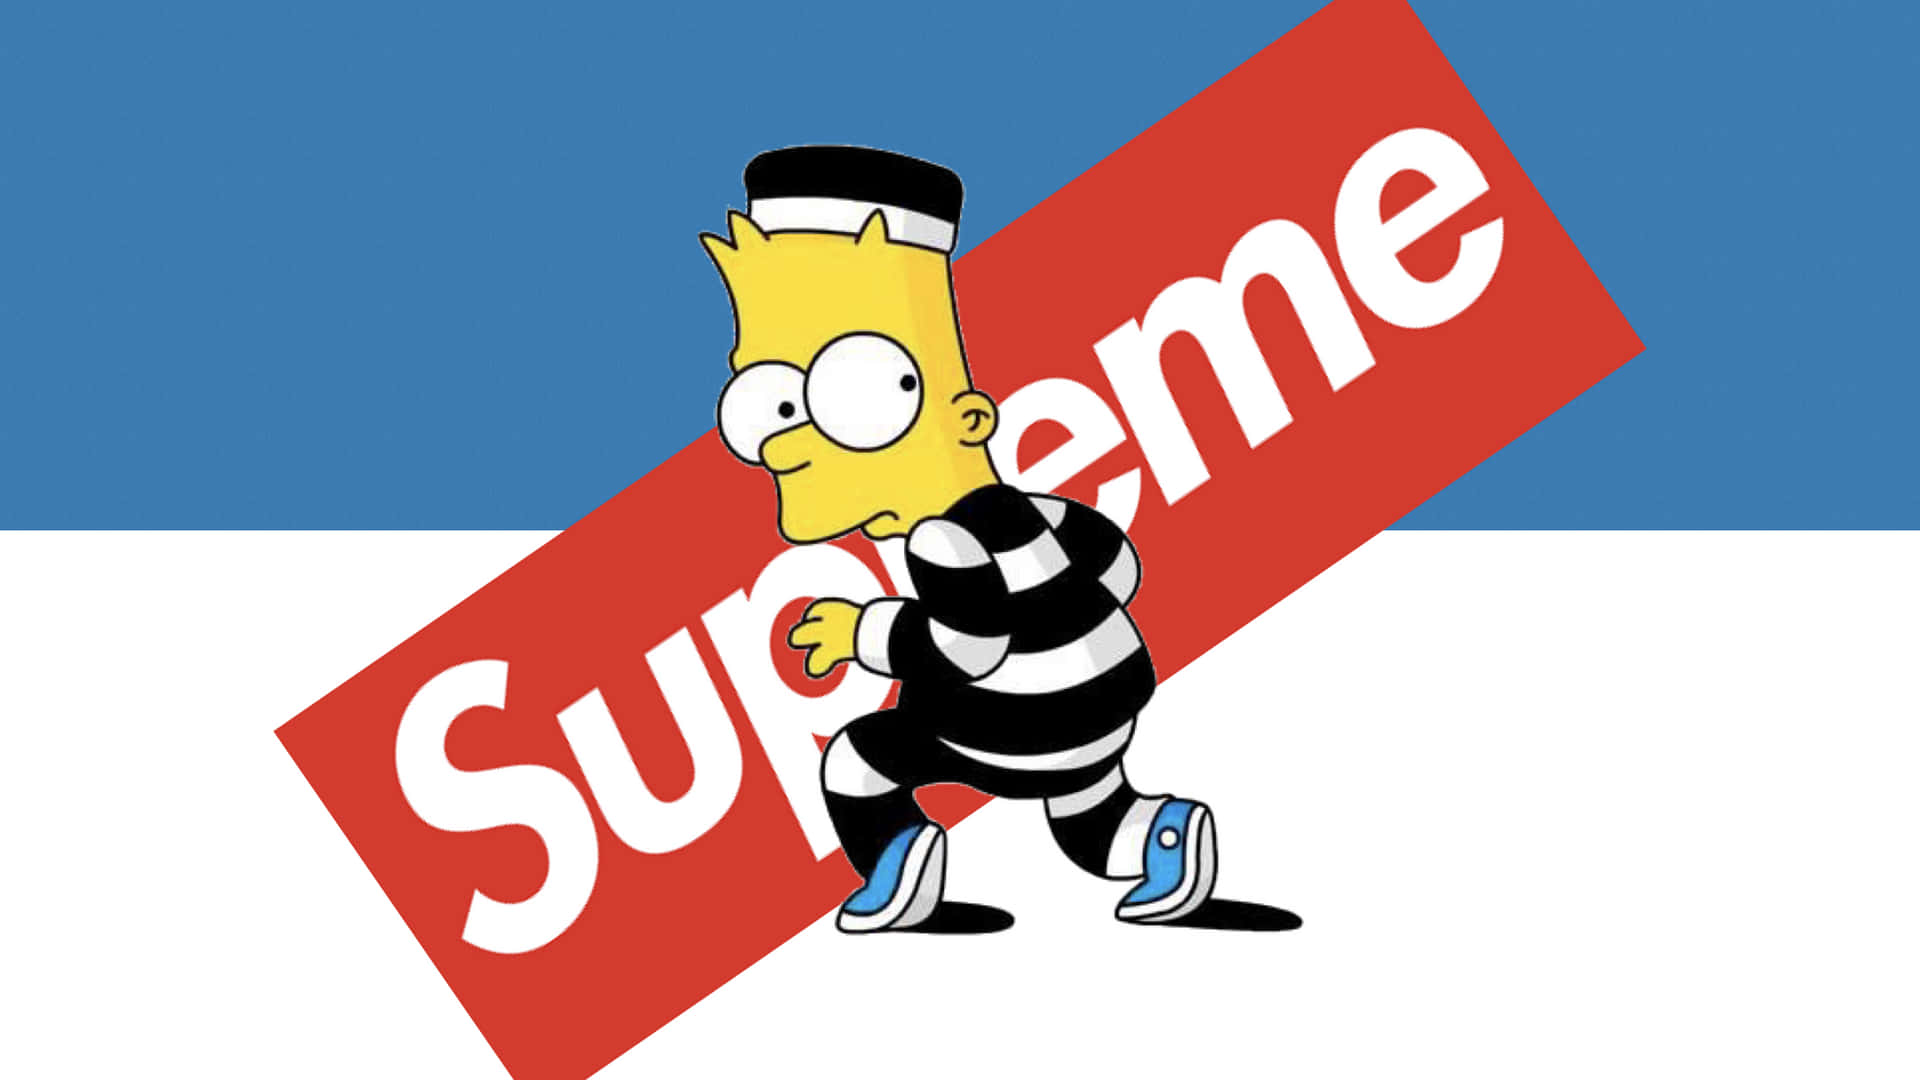 Standing Out From The Crowd In His Supreme Bart Simpson Attire